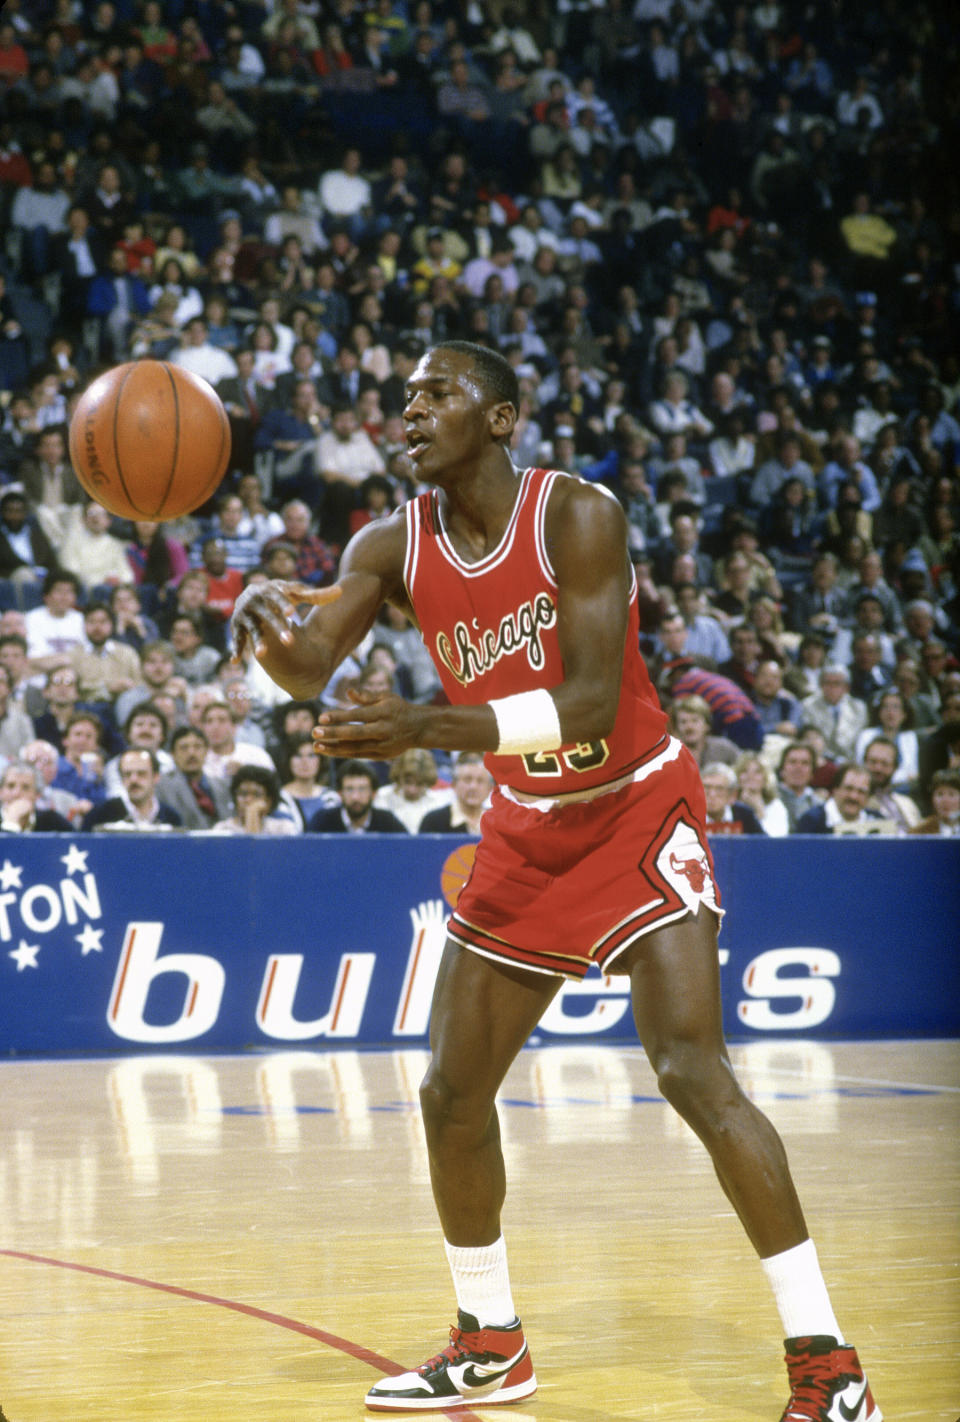 air jordan 1 history, LANDOVER, MD - CIRCA 1985: Michael Jordan #23 of the Chicago Bulls passes the ball against the Washington Bullets during an NBA basketball game circa 1985 at the Capital Centre in Landover, Maryland. Jordan played for the Bulls from 1984-93 and 1995 - 98. (Photo by Focus on Sport/Getty Images) *** Local Caption *** Michael Jordan